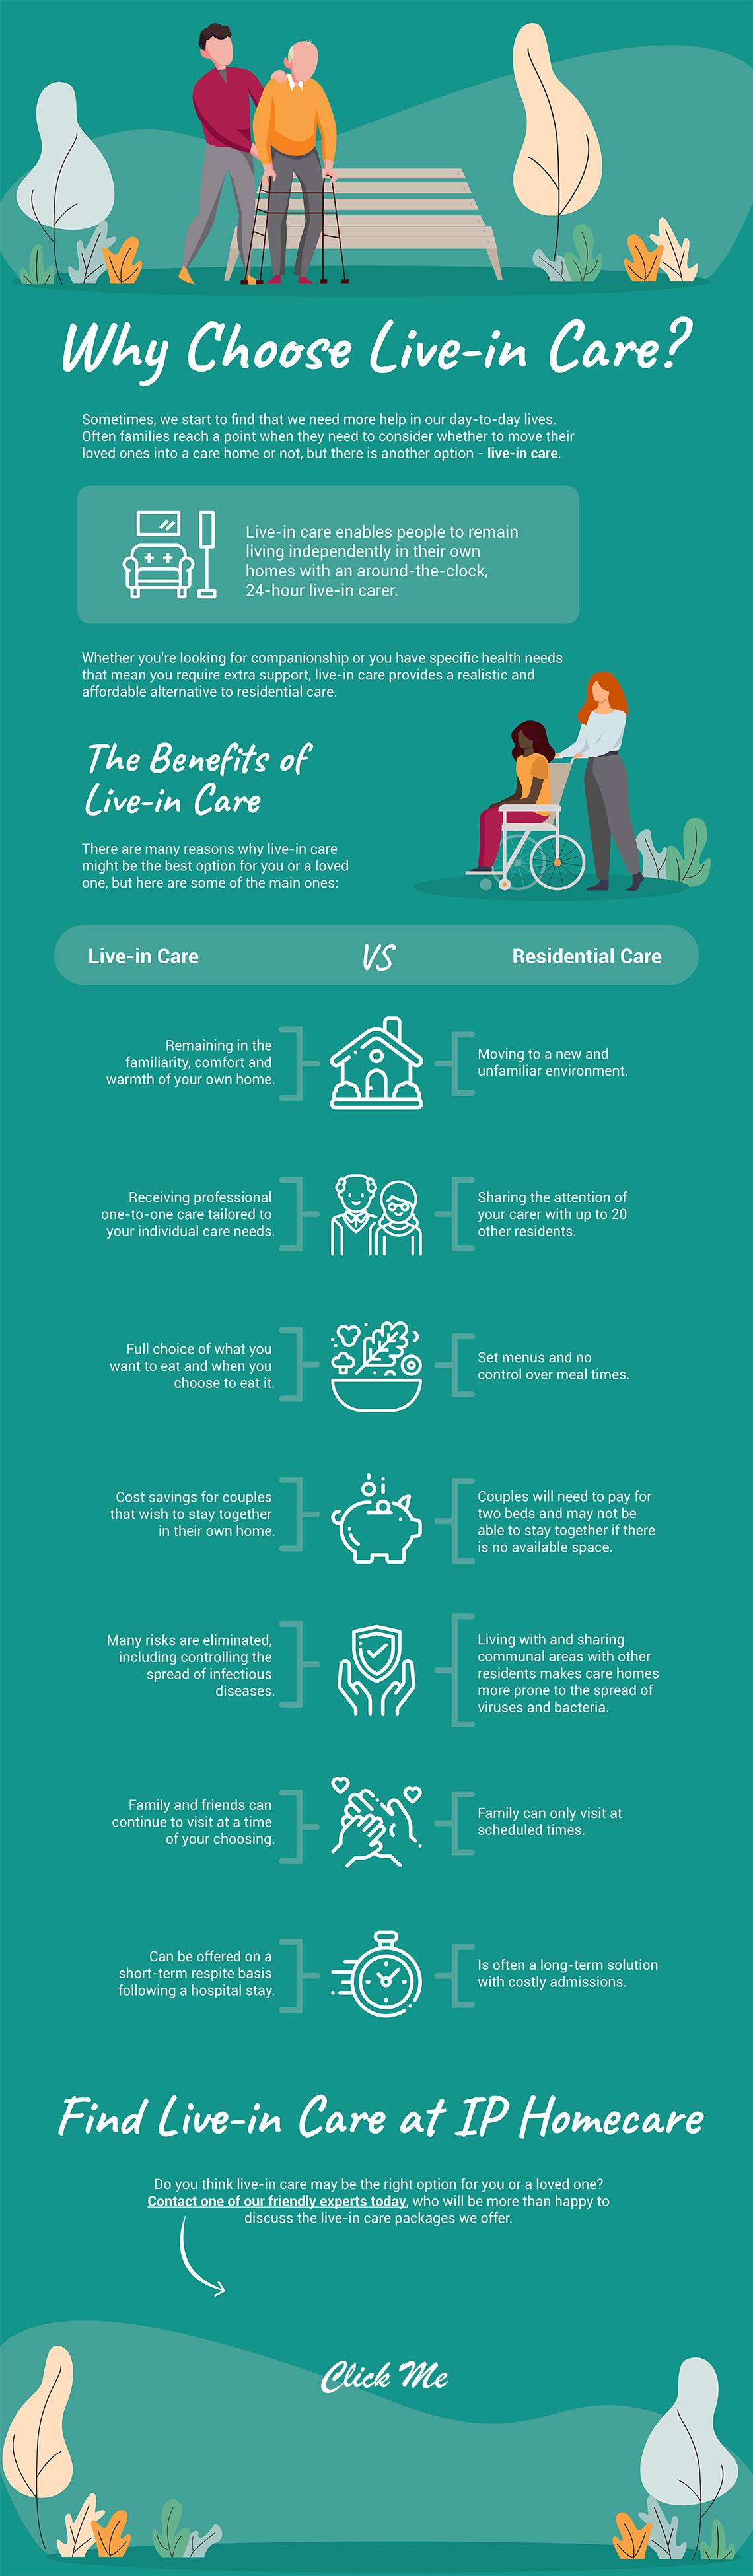 Why Choose Live in Care?